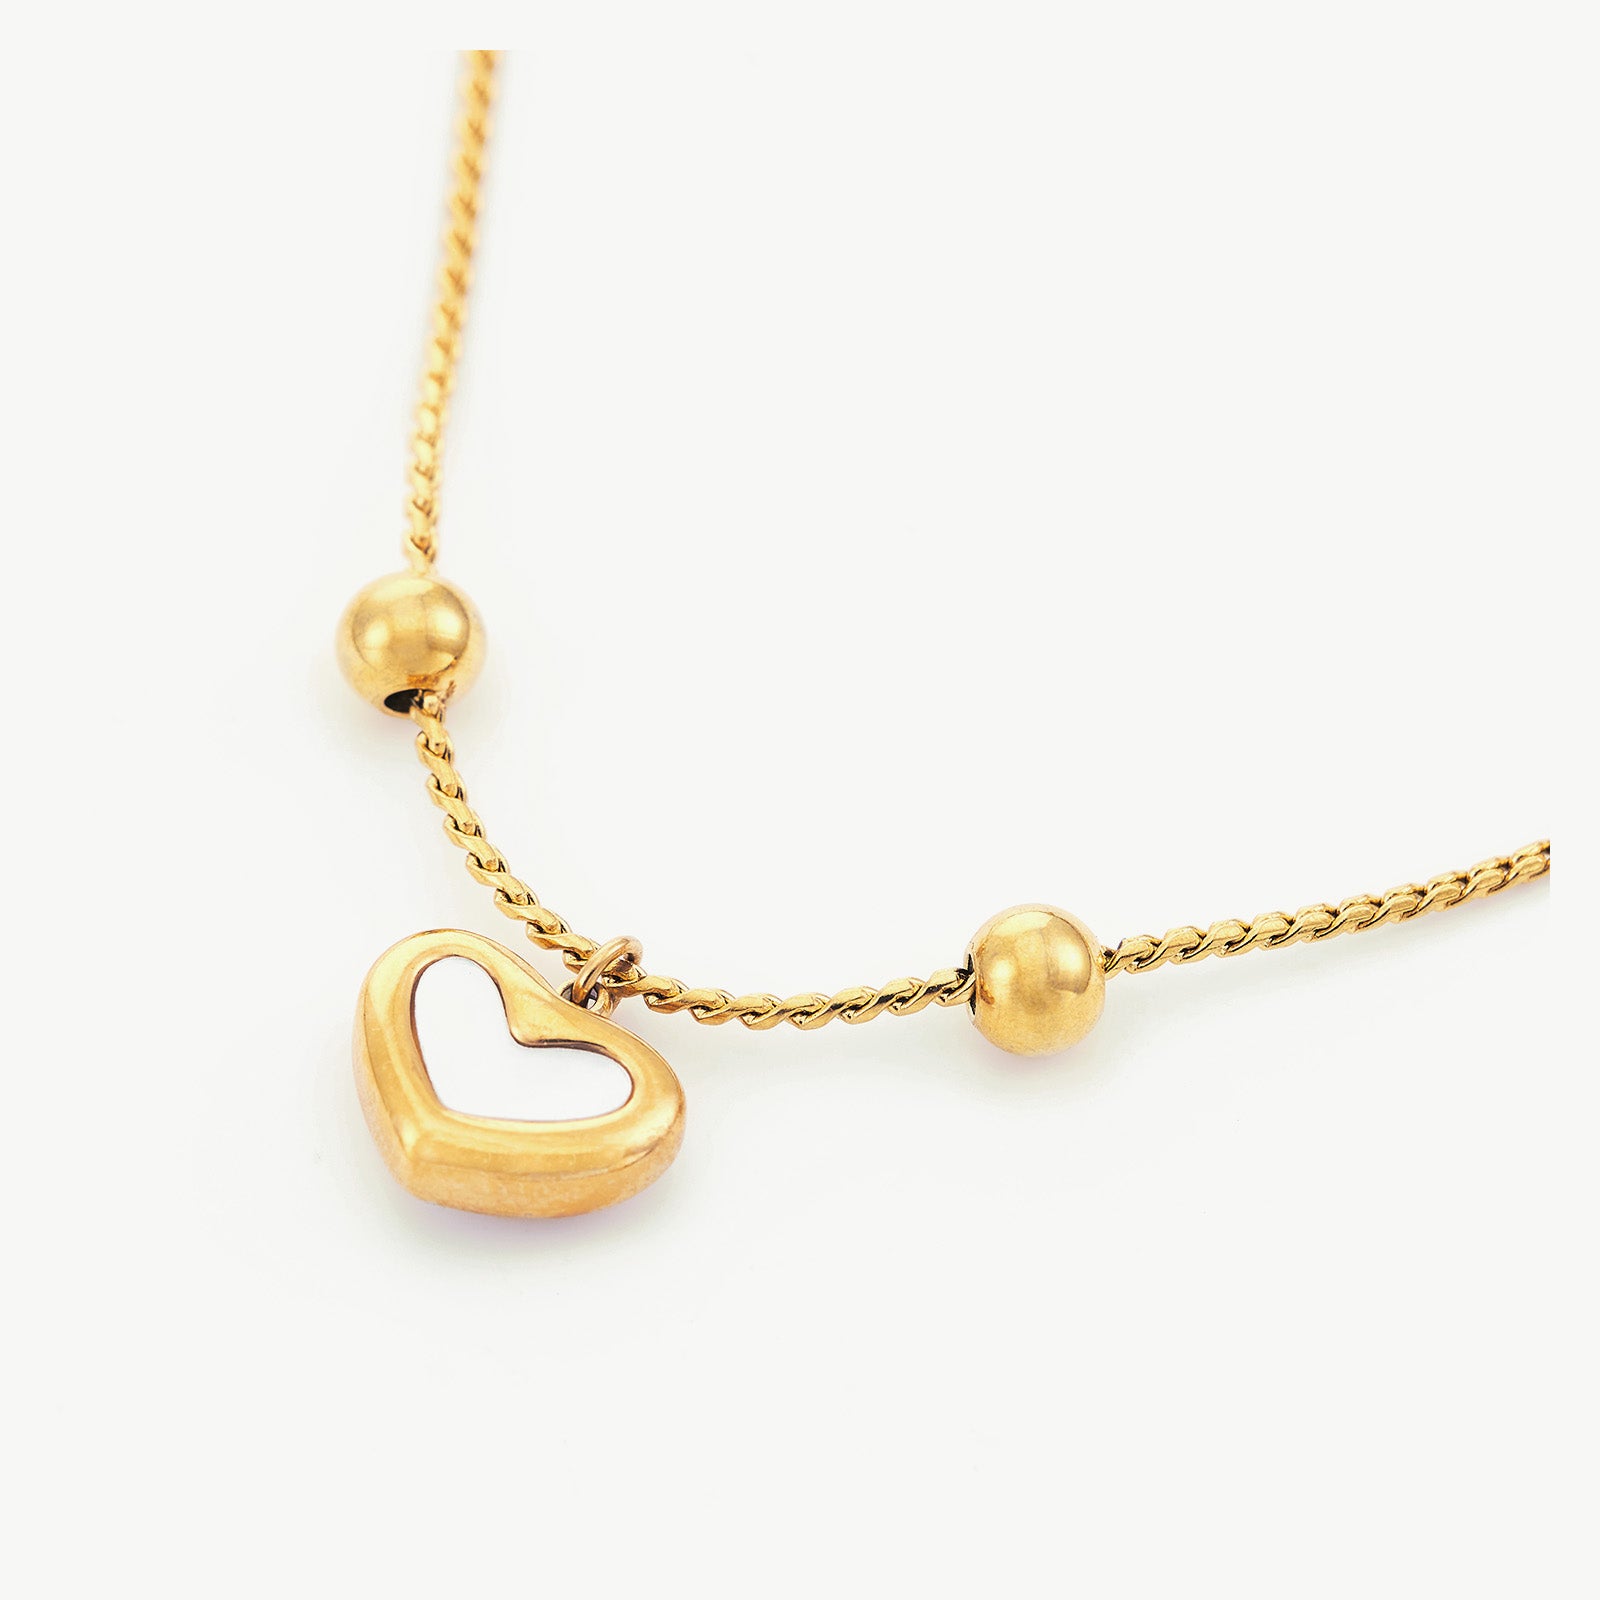 Gold Shell Drop Bracelet, inspired by ocean whispers, this bracelet features dangling gold shells that capture the essence of seaside serenity, adding a touch of tranquility and style to your jewelry collection